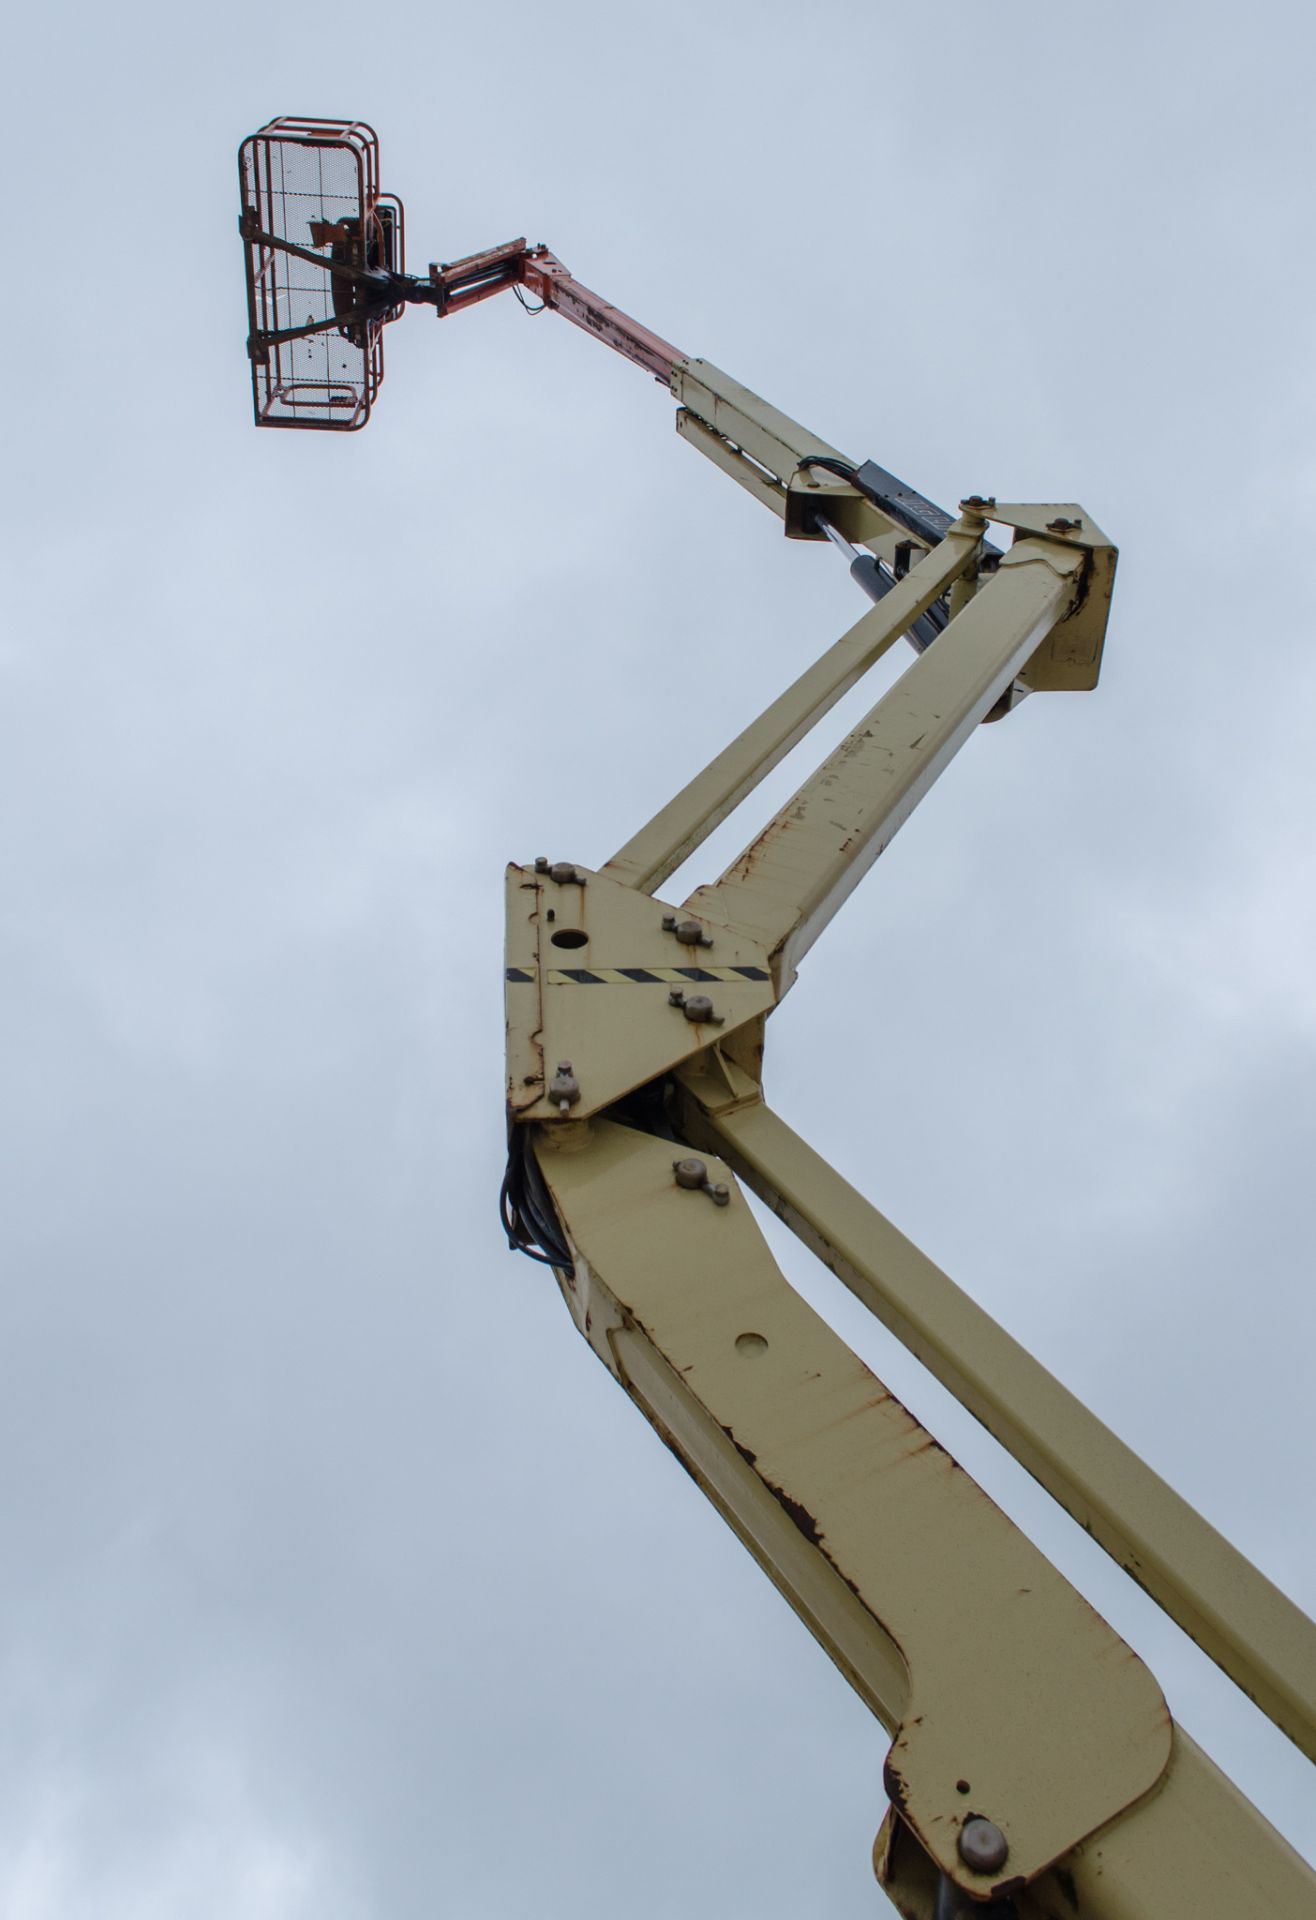 JLG 510AJ diesel driven articulated boom access platform Year: 2015 S/N: E300002191 Recorded - Image 10 of 18